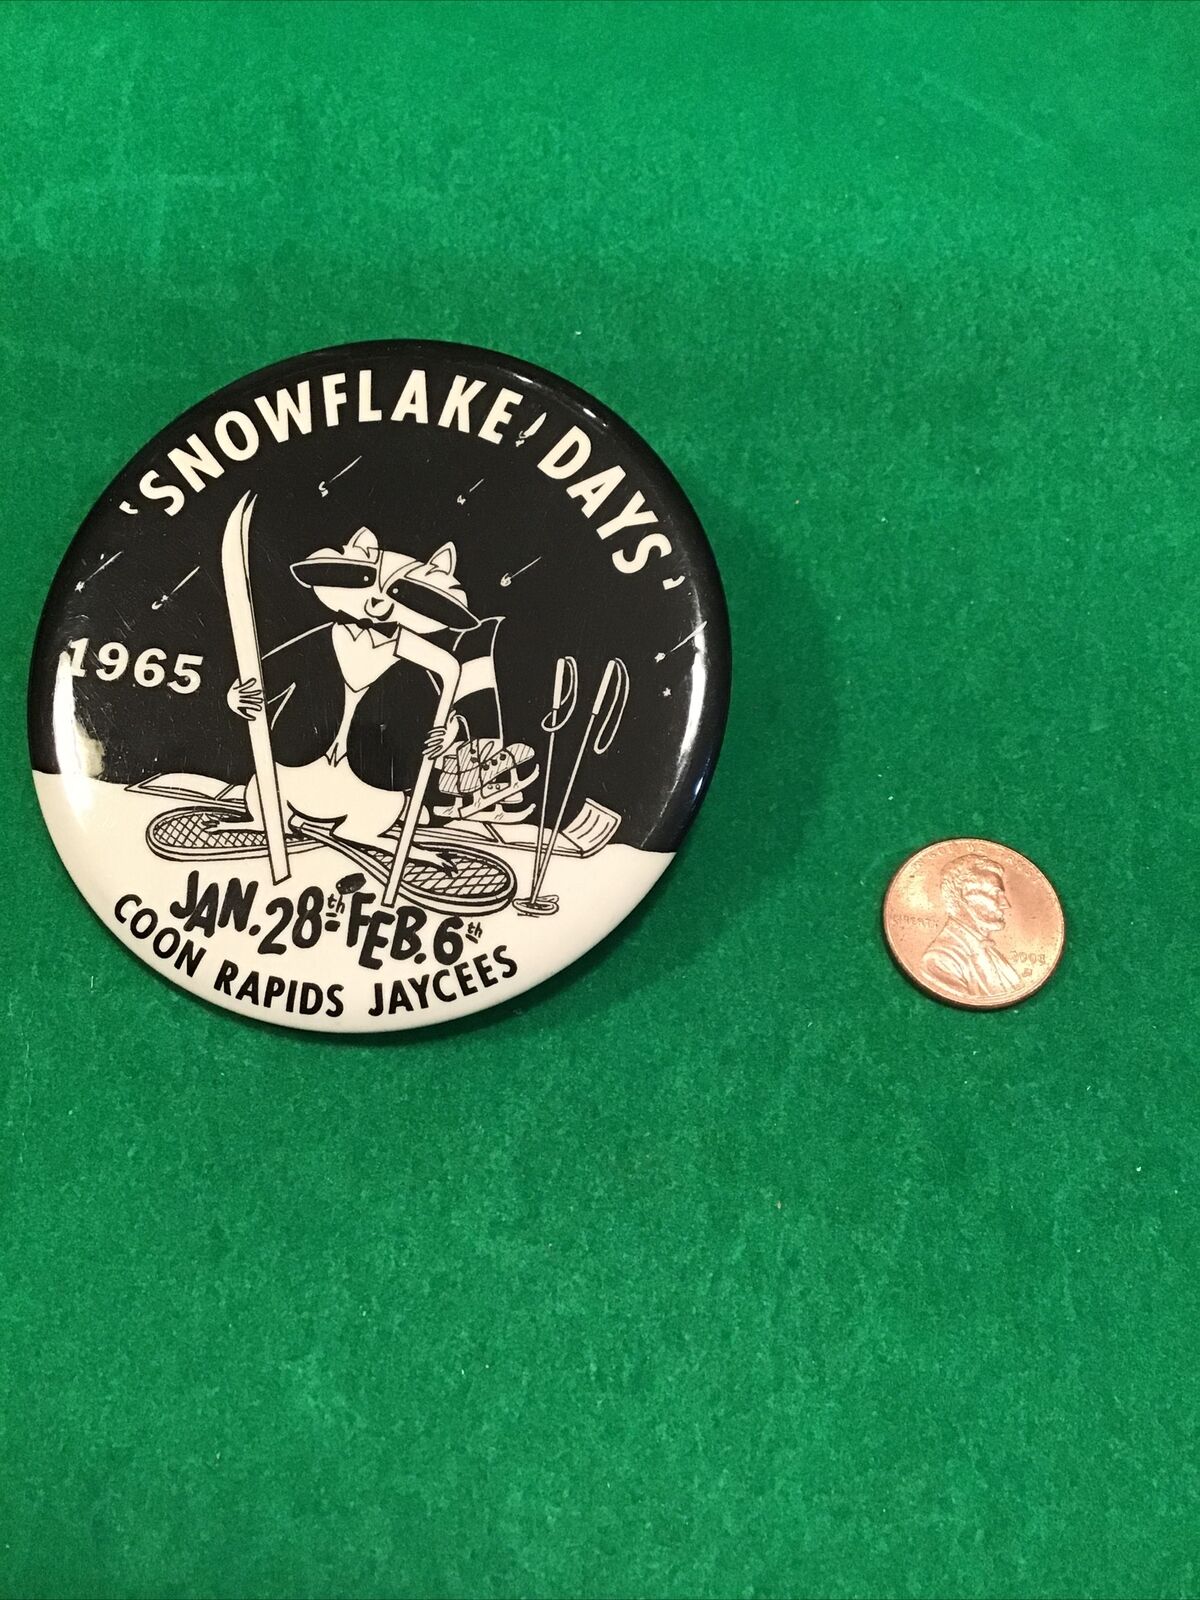 Vtg Winter Holiday Button Coon Rapids Minnesota 1965 Snowflake days 3.5 Inch